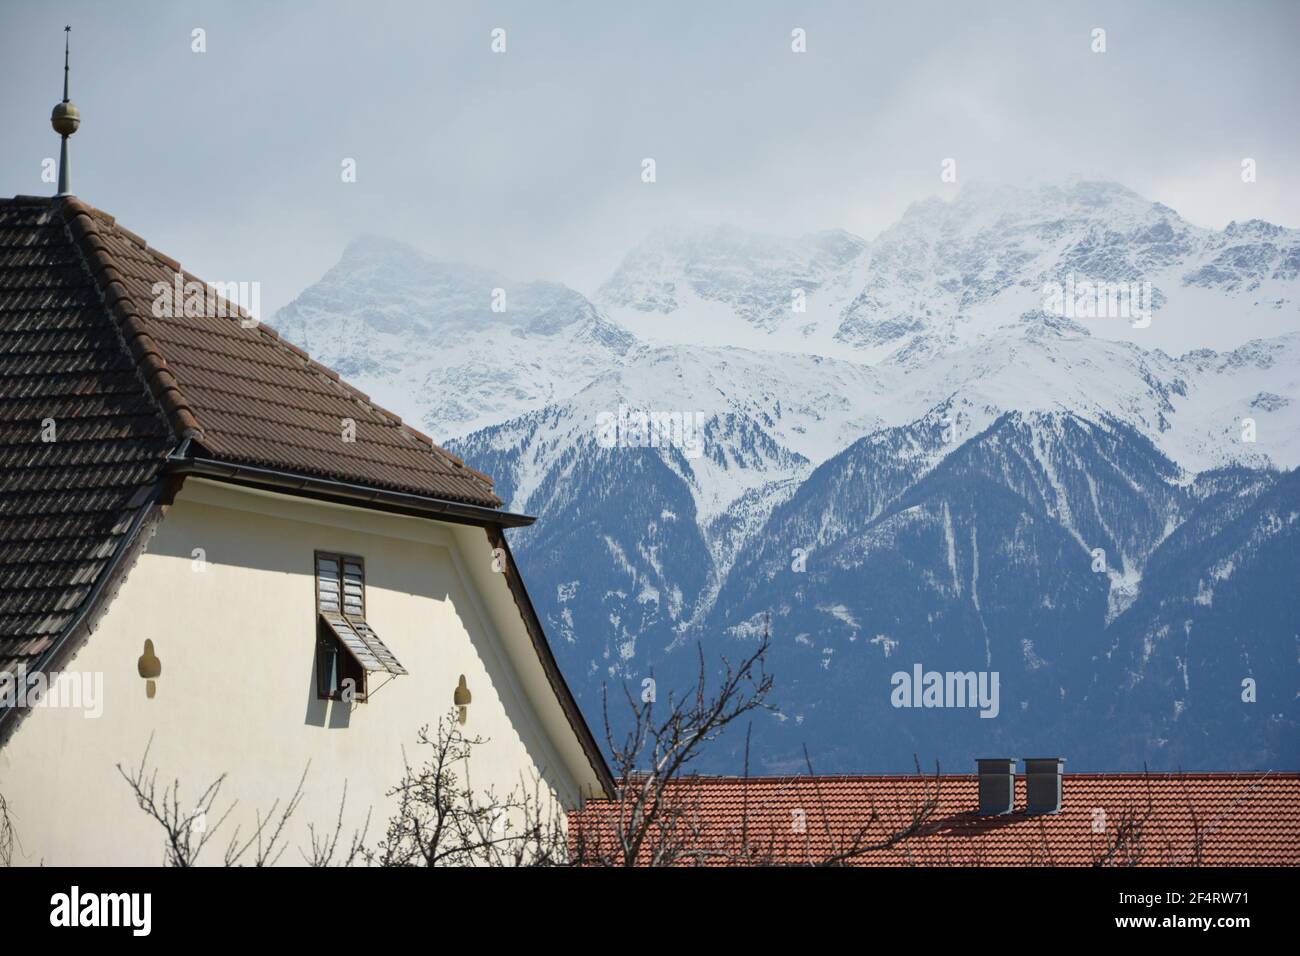 Snow-capped mountains and rooftop in Mals / Malles, Val Venosta / Vinschgau, South Tirol, Italy, near the Swiss and Austrian border. Stock Photo